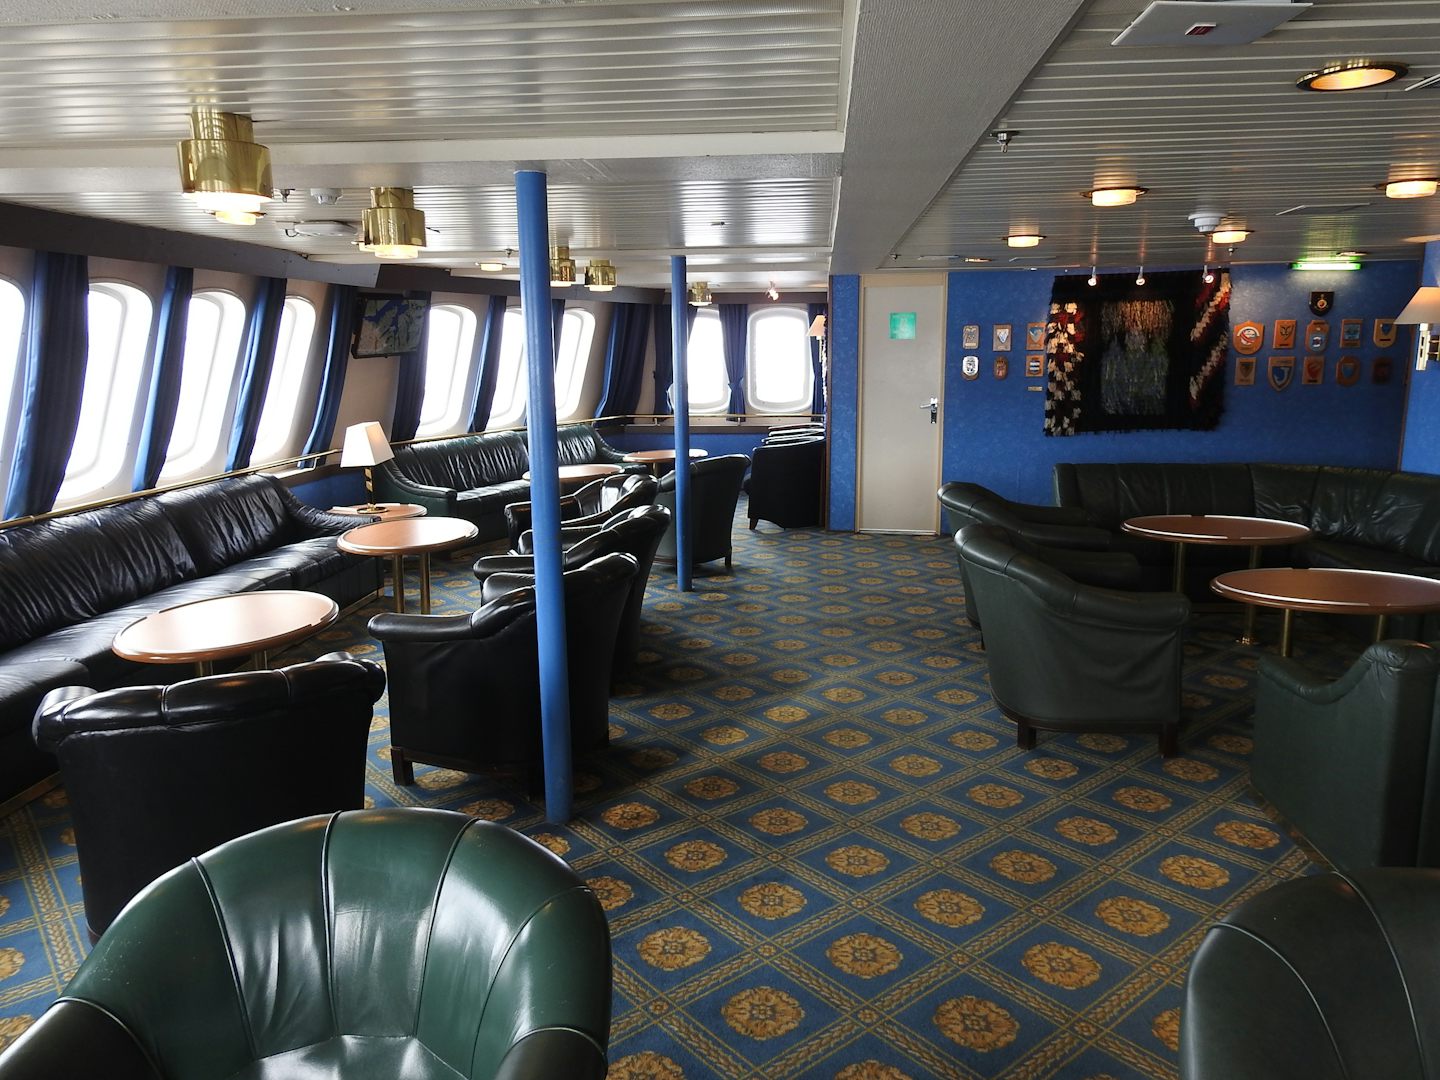 Trollfyord Lounge at front of ship on Deck E. Never used this lounge, just